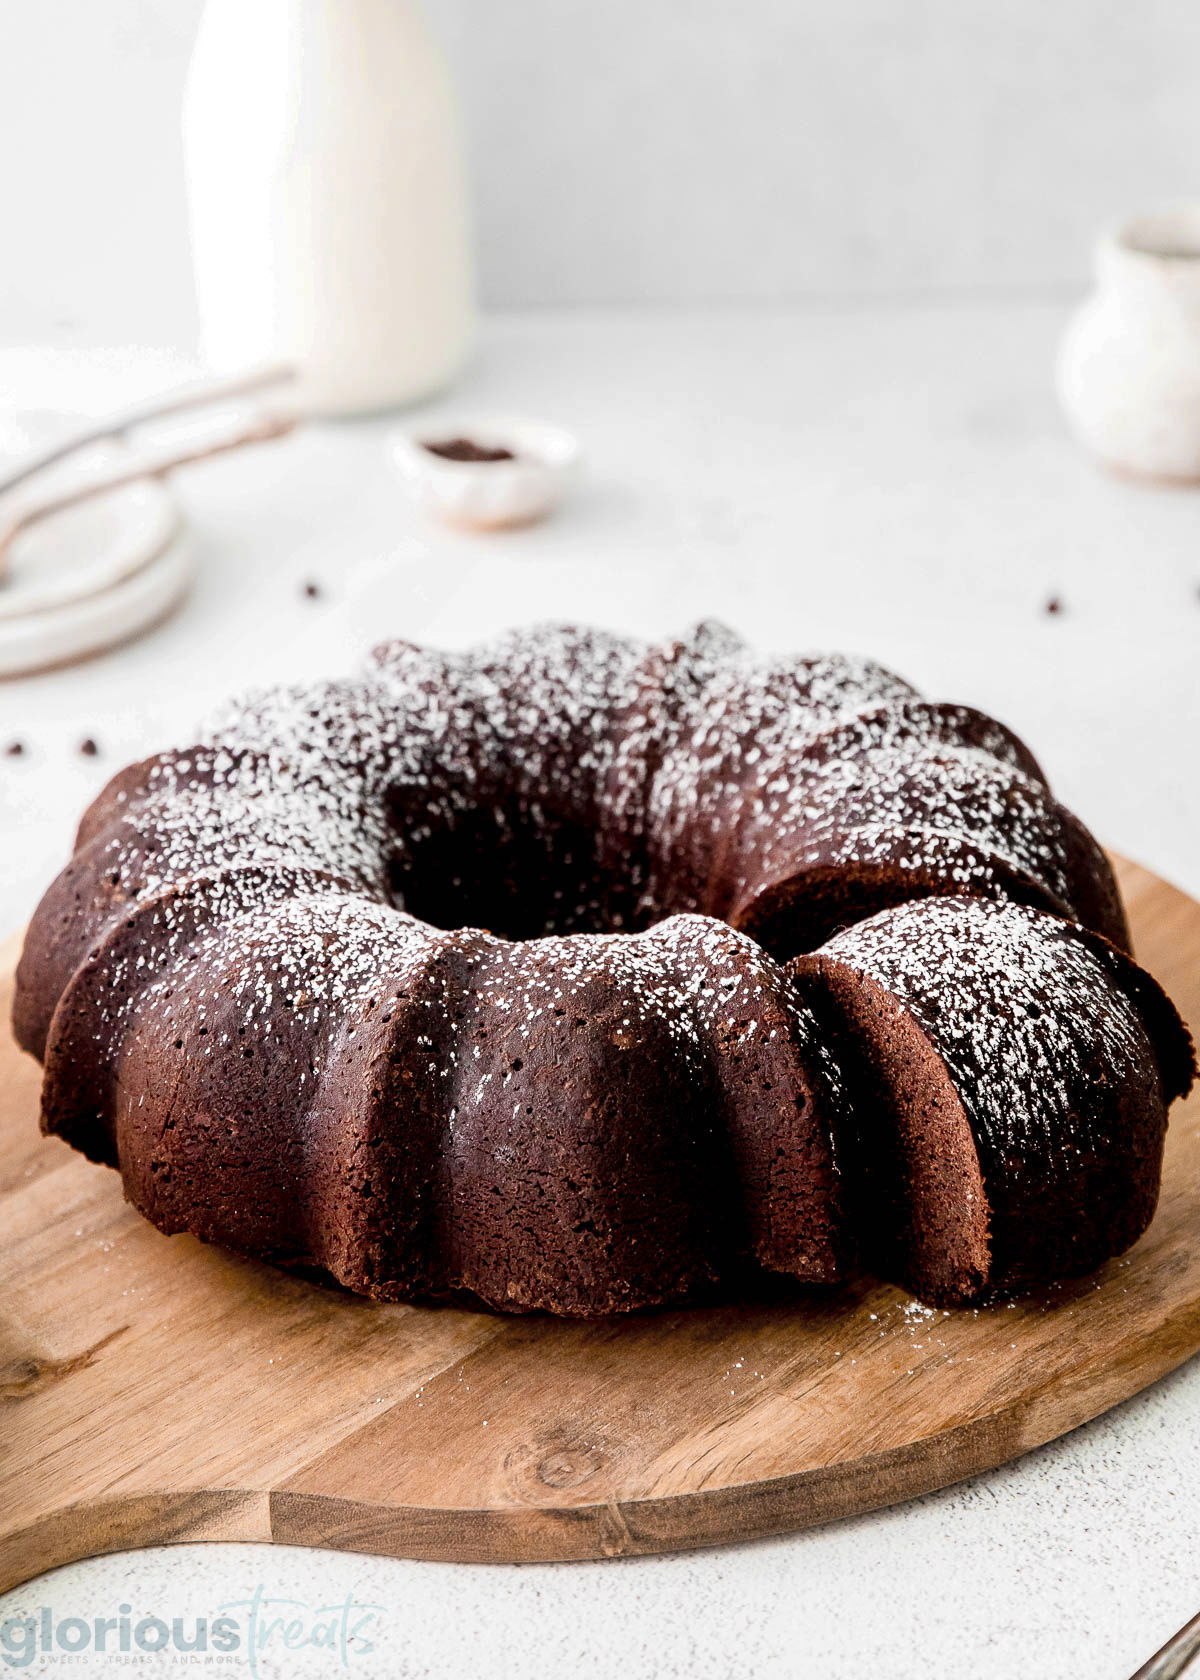 a chocolate bundt cake on a wood cutting board with a slice taken out of it.